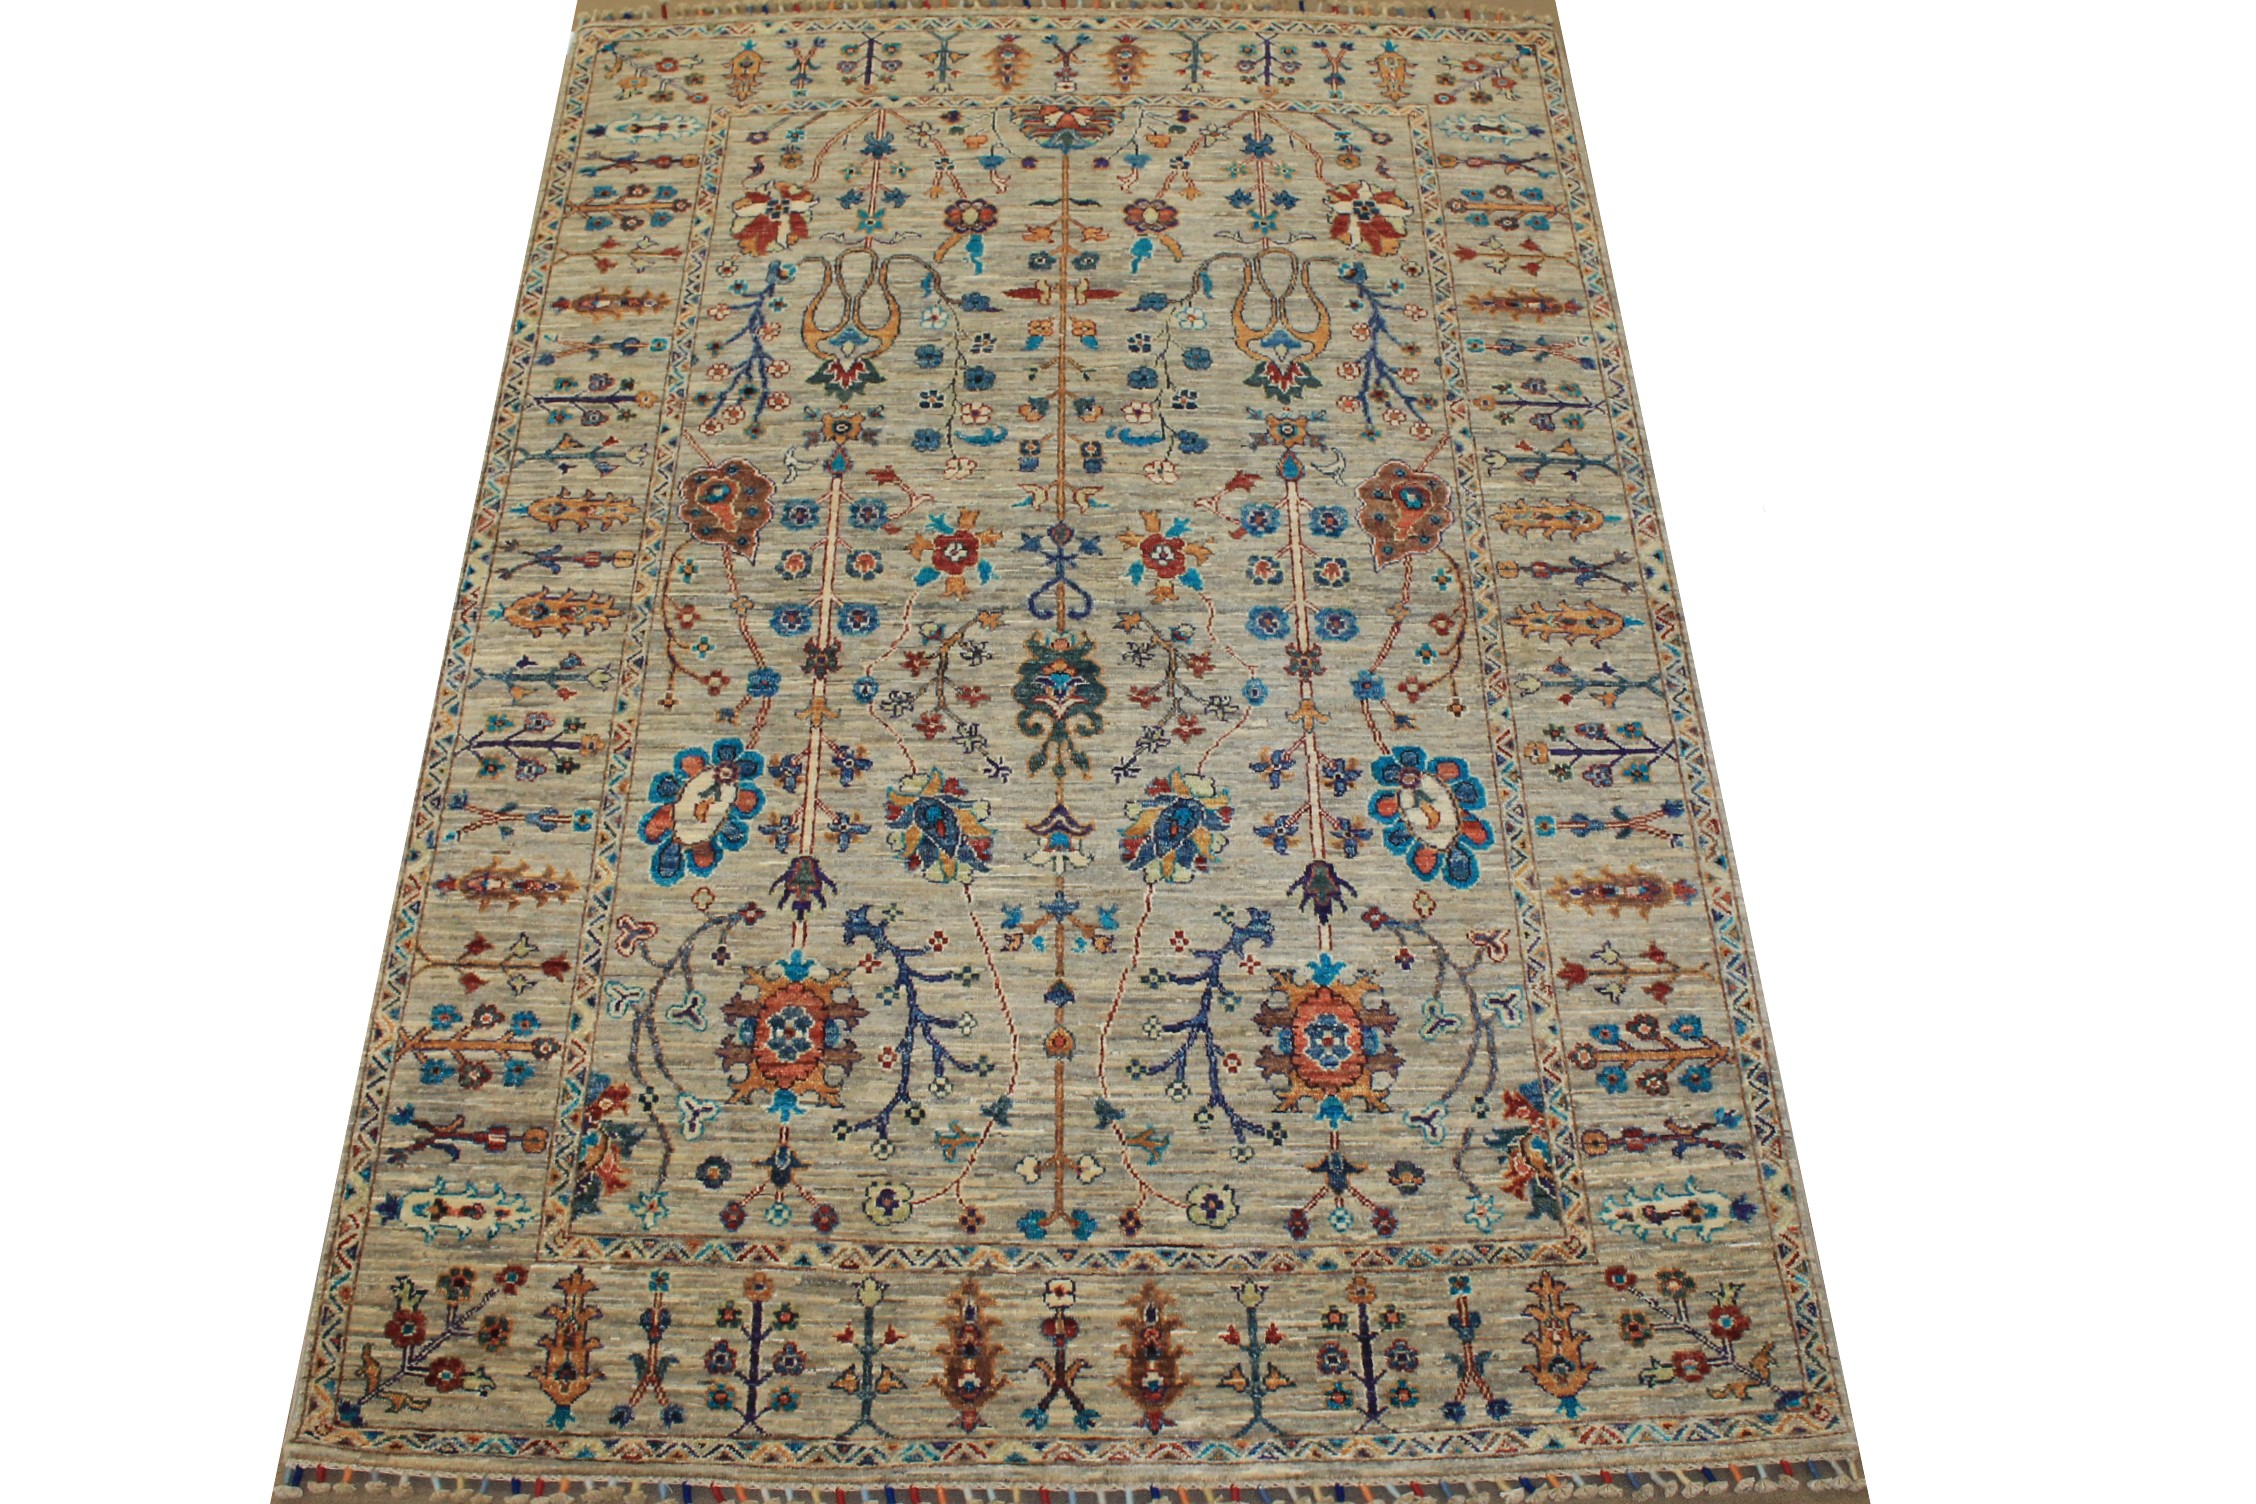 5x7/8 Tribal Hand Knotted Wool Area Rug - MR025310